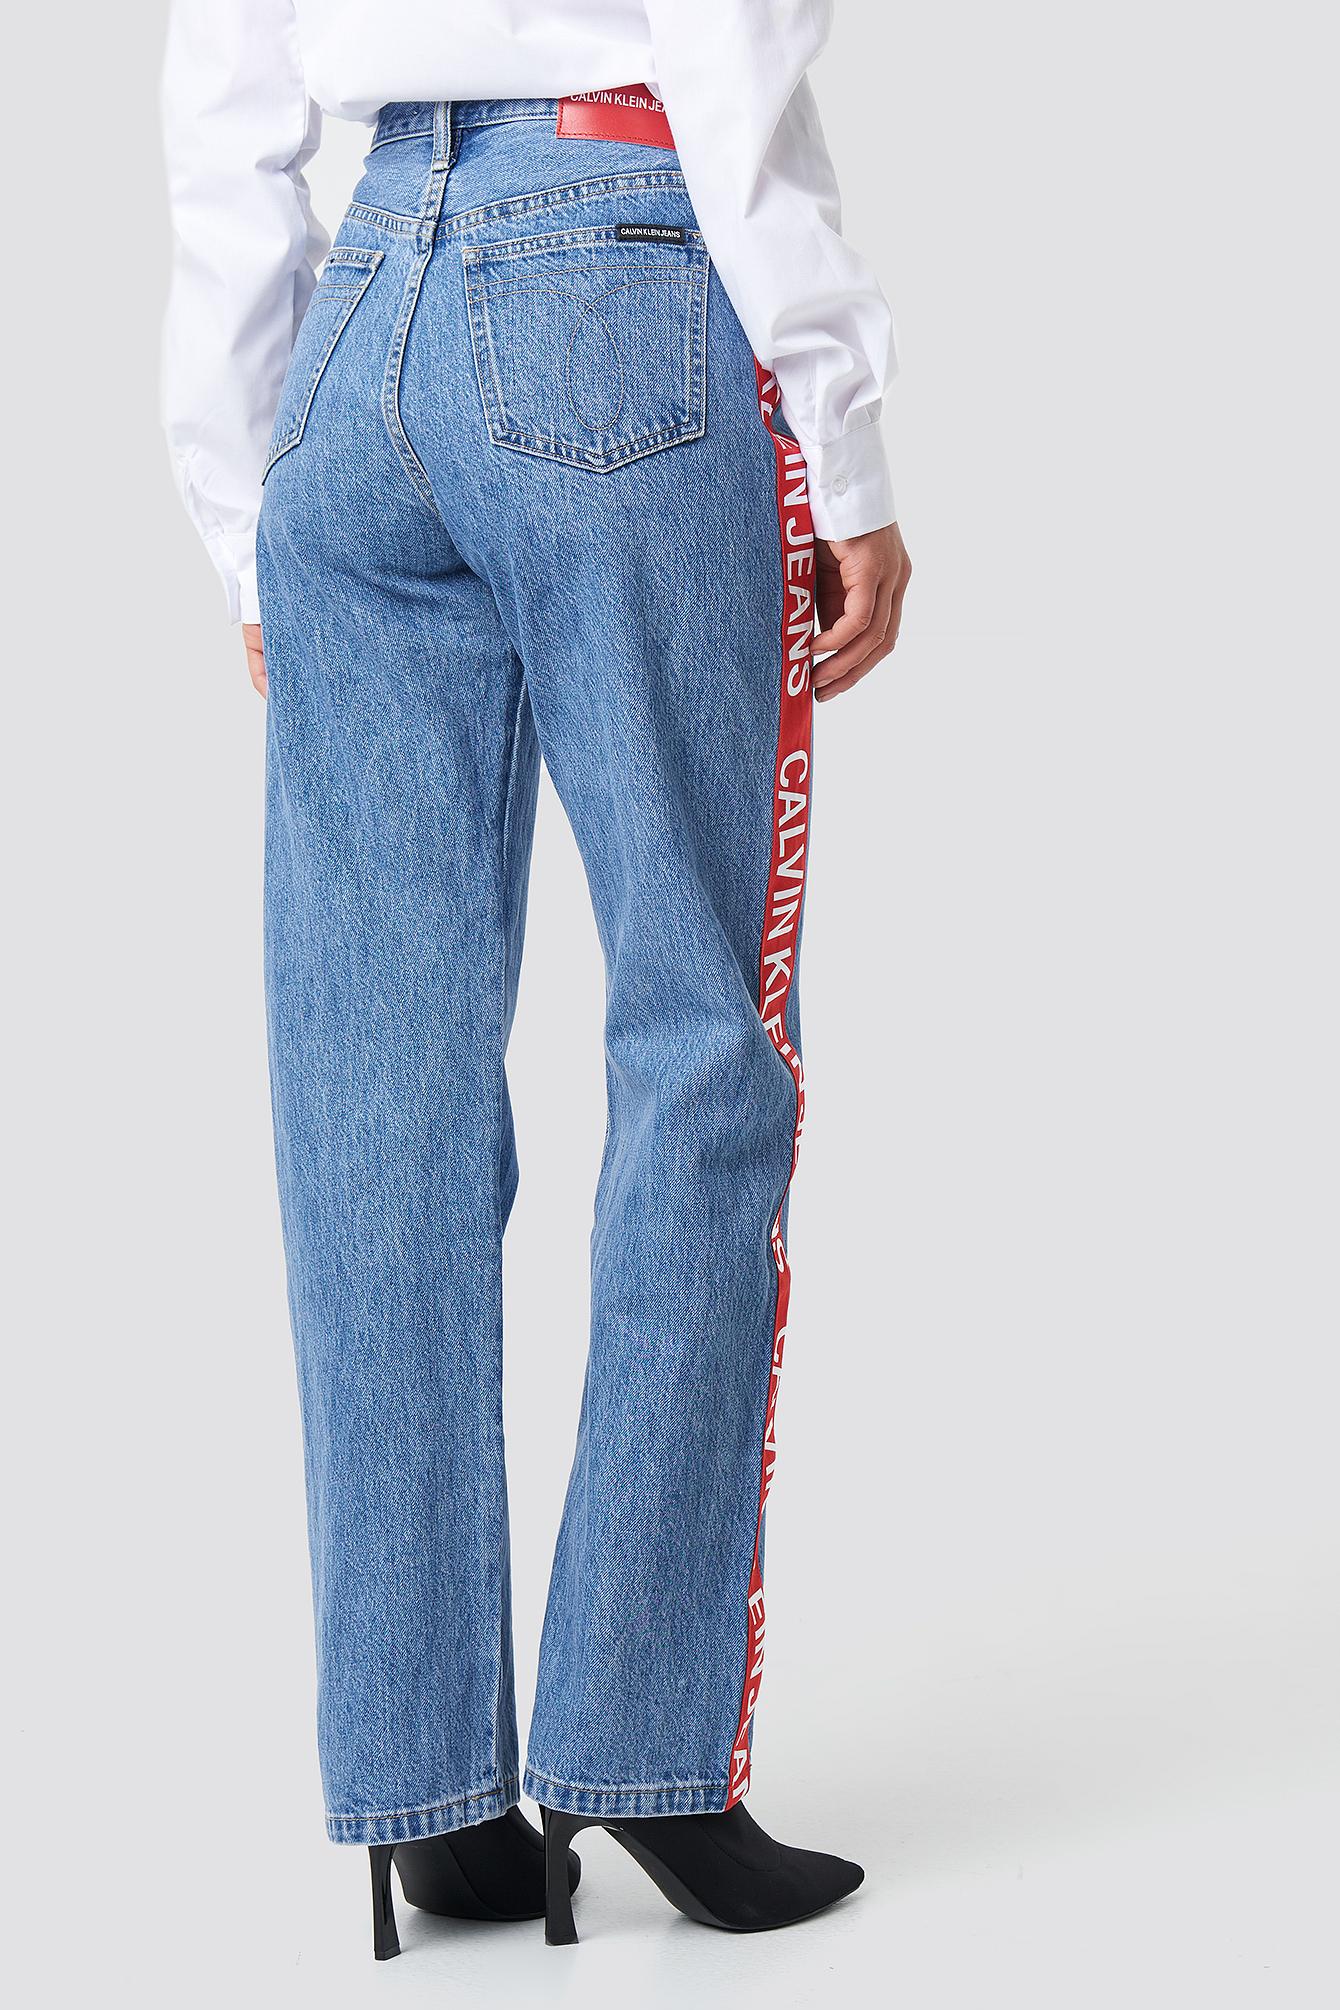 calvin klein red stripe jeans Online Shopping mall | Find the best prices  and places to buy -